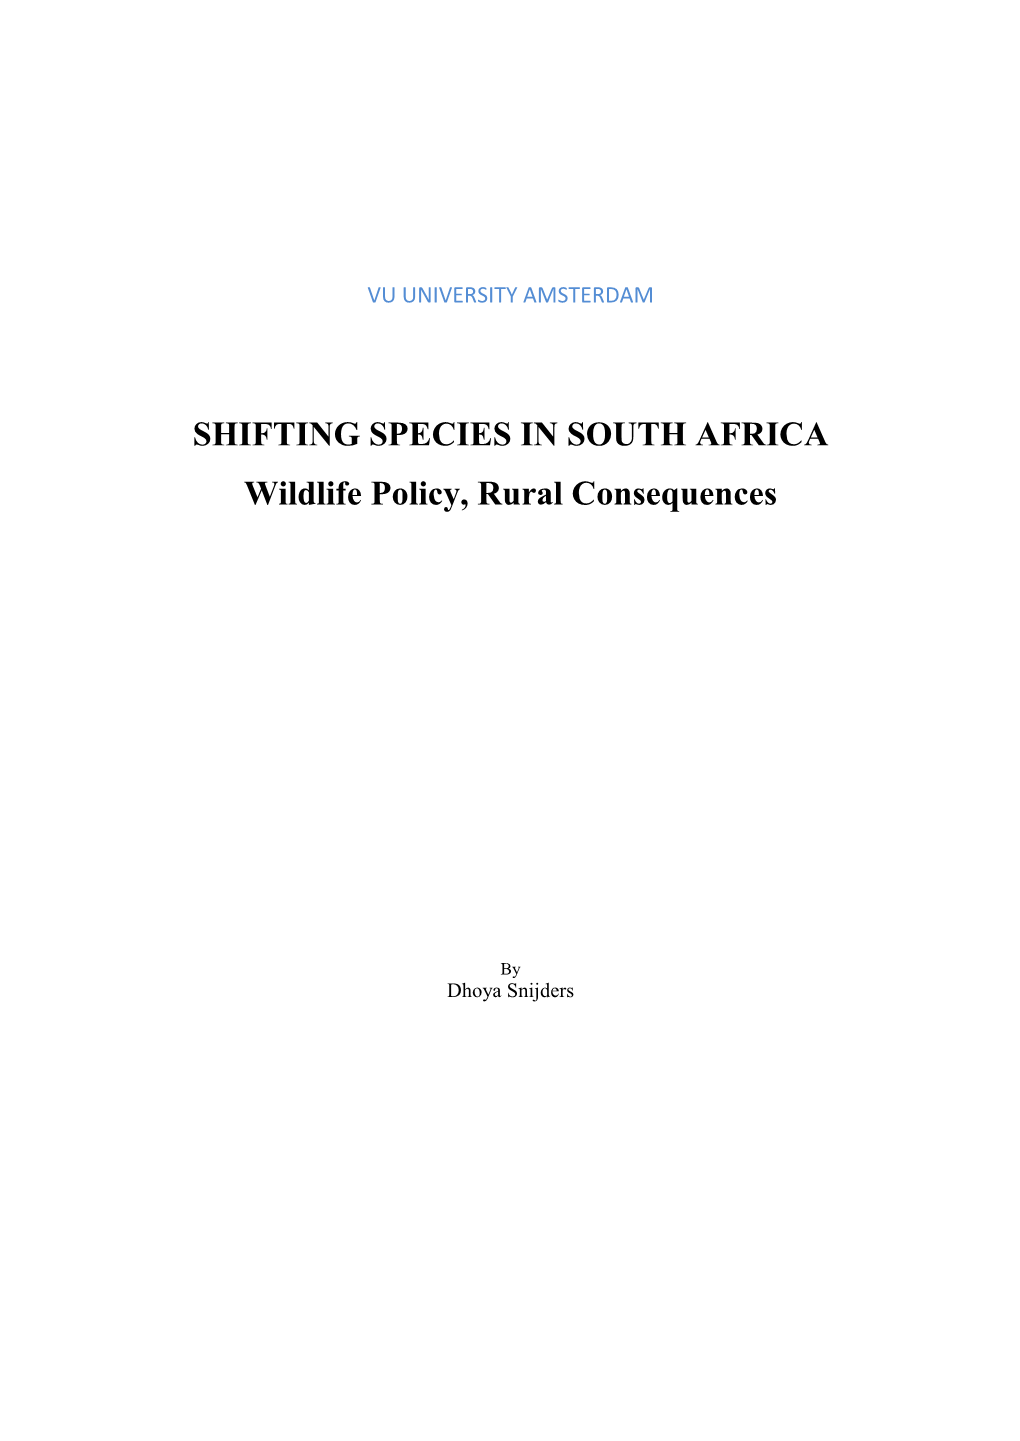 SHIFTING SPECIES in SOUTH AFRICA Wildlife Policy, Rural